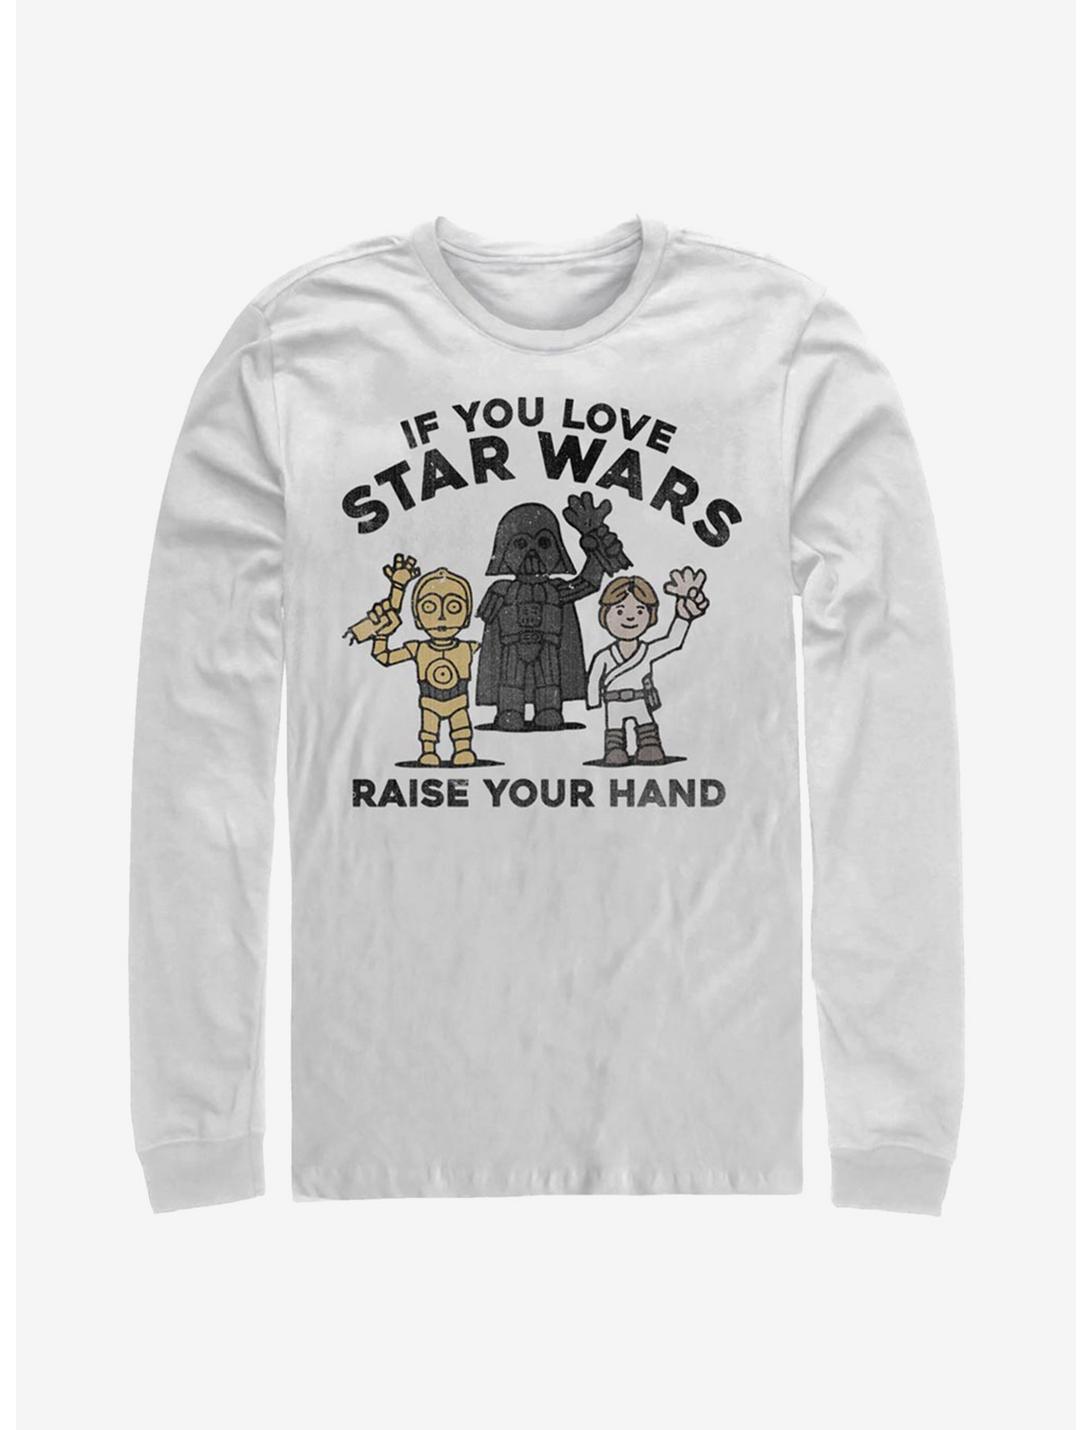 Star Wars Raise Your Hands Long-Sleeve T-Shirt, WHITE, hi-res